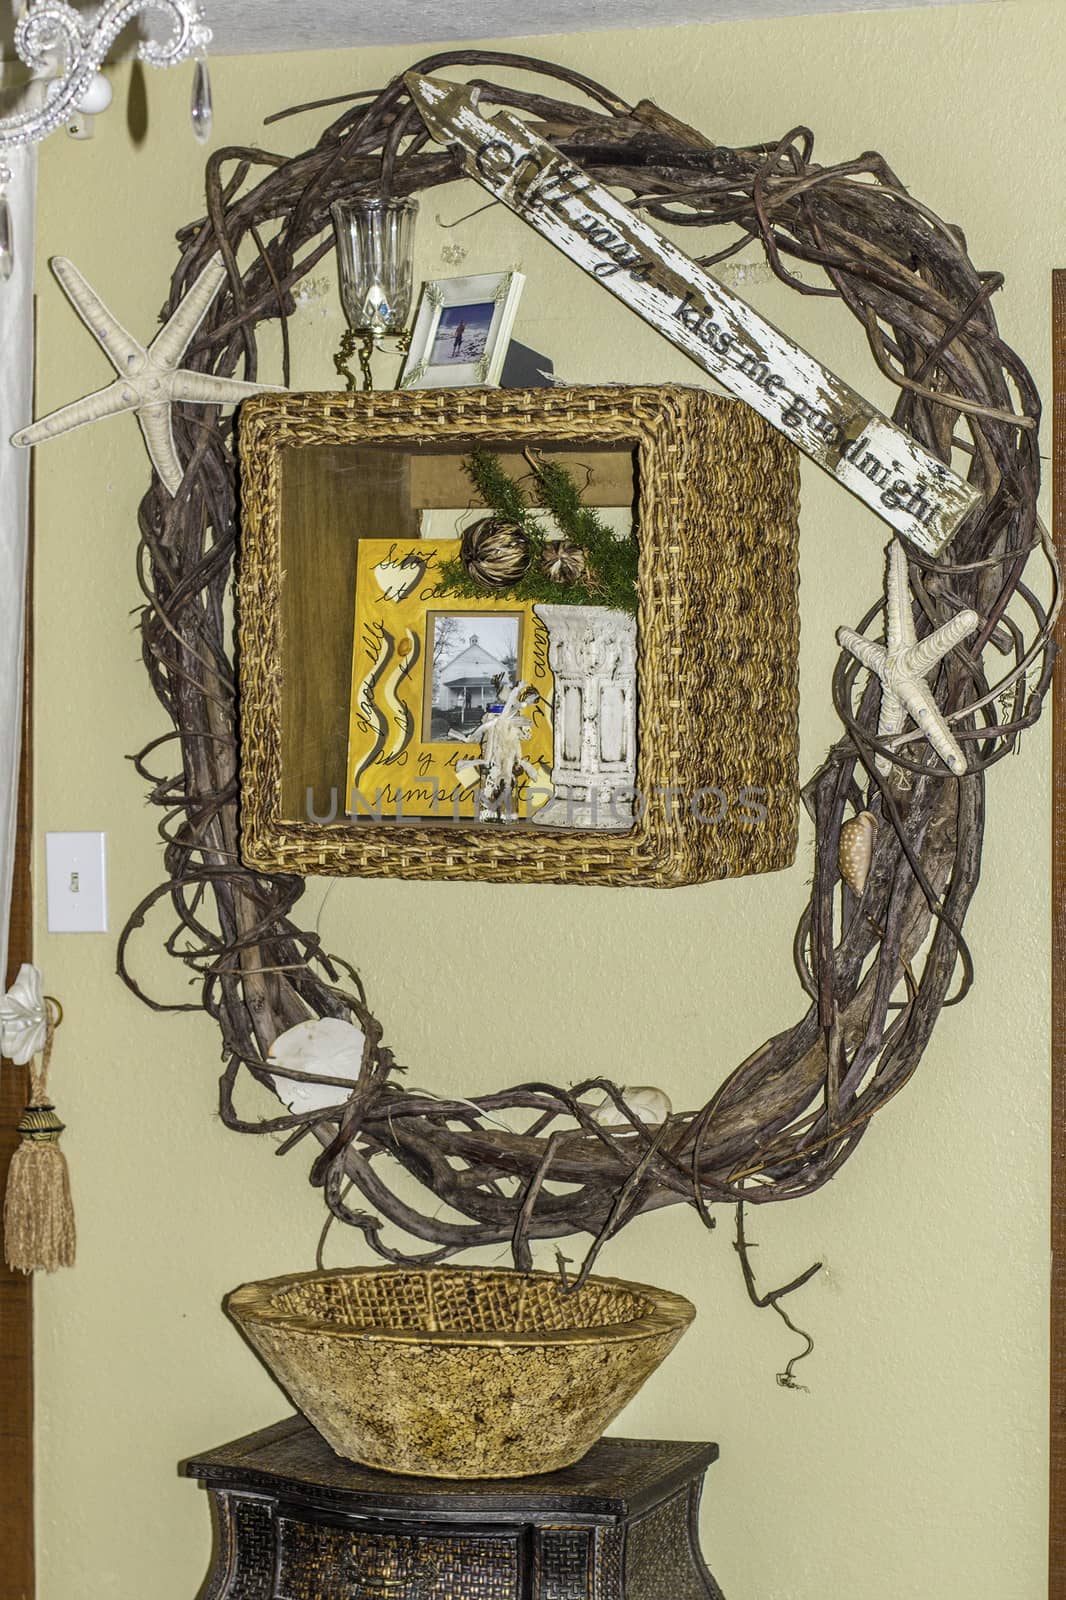 A view of a decorative wicker wreath hanging on a wall.